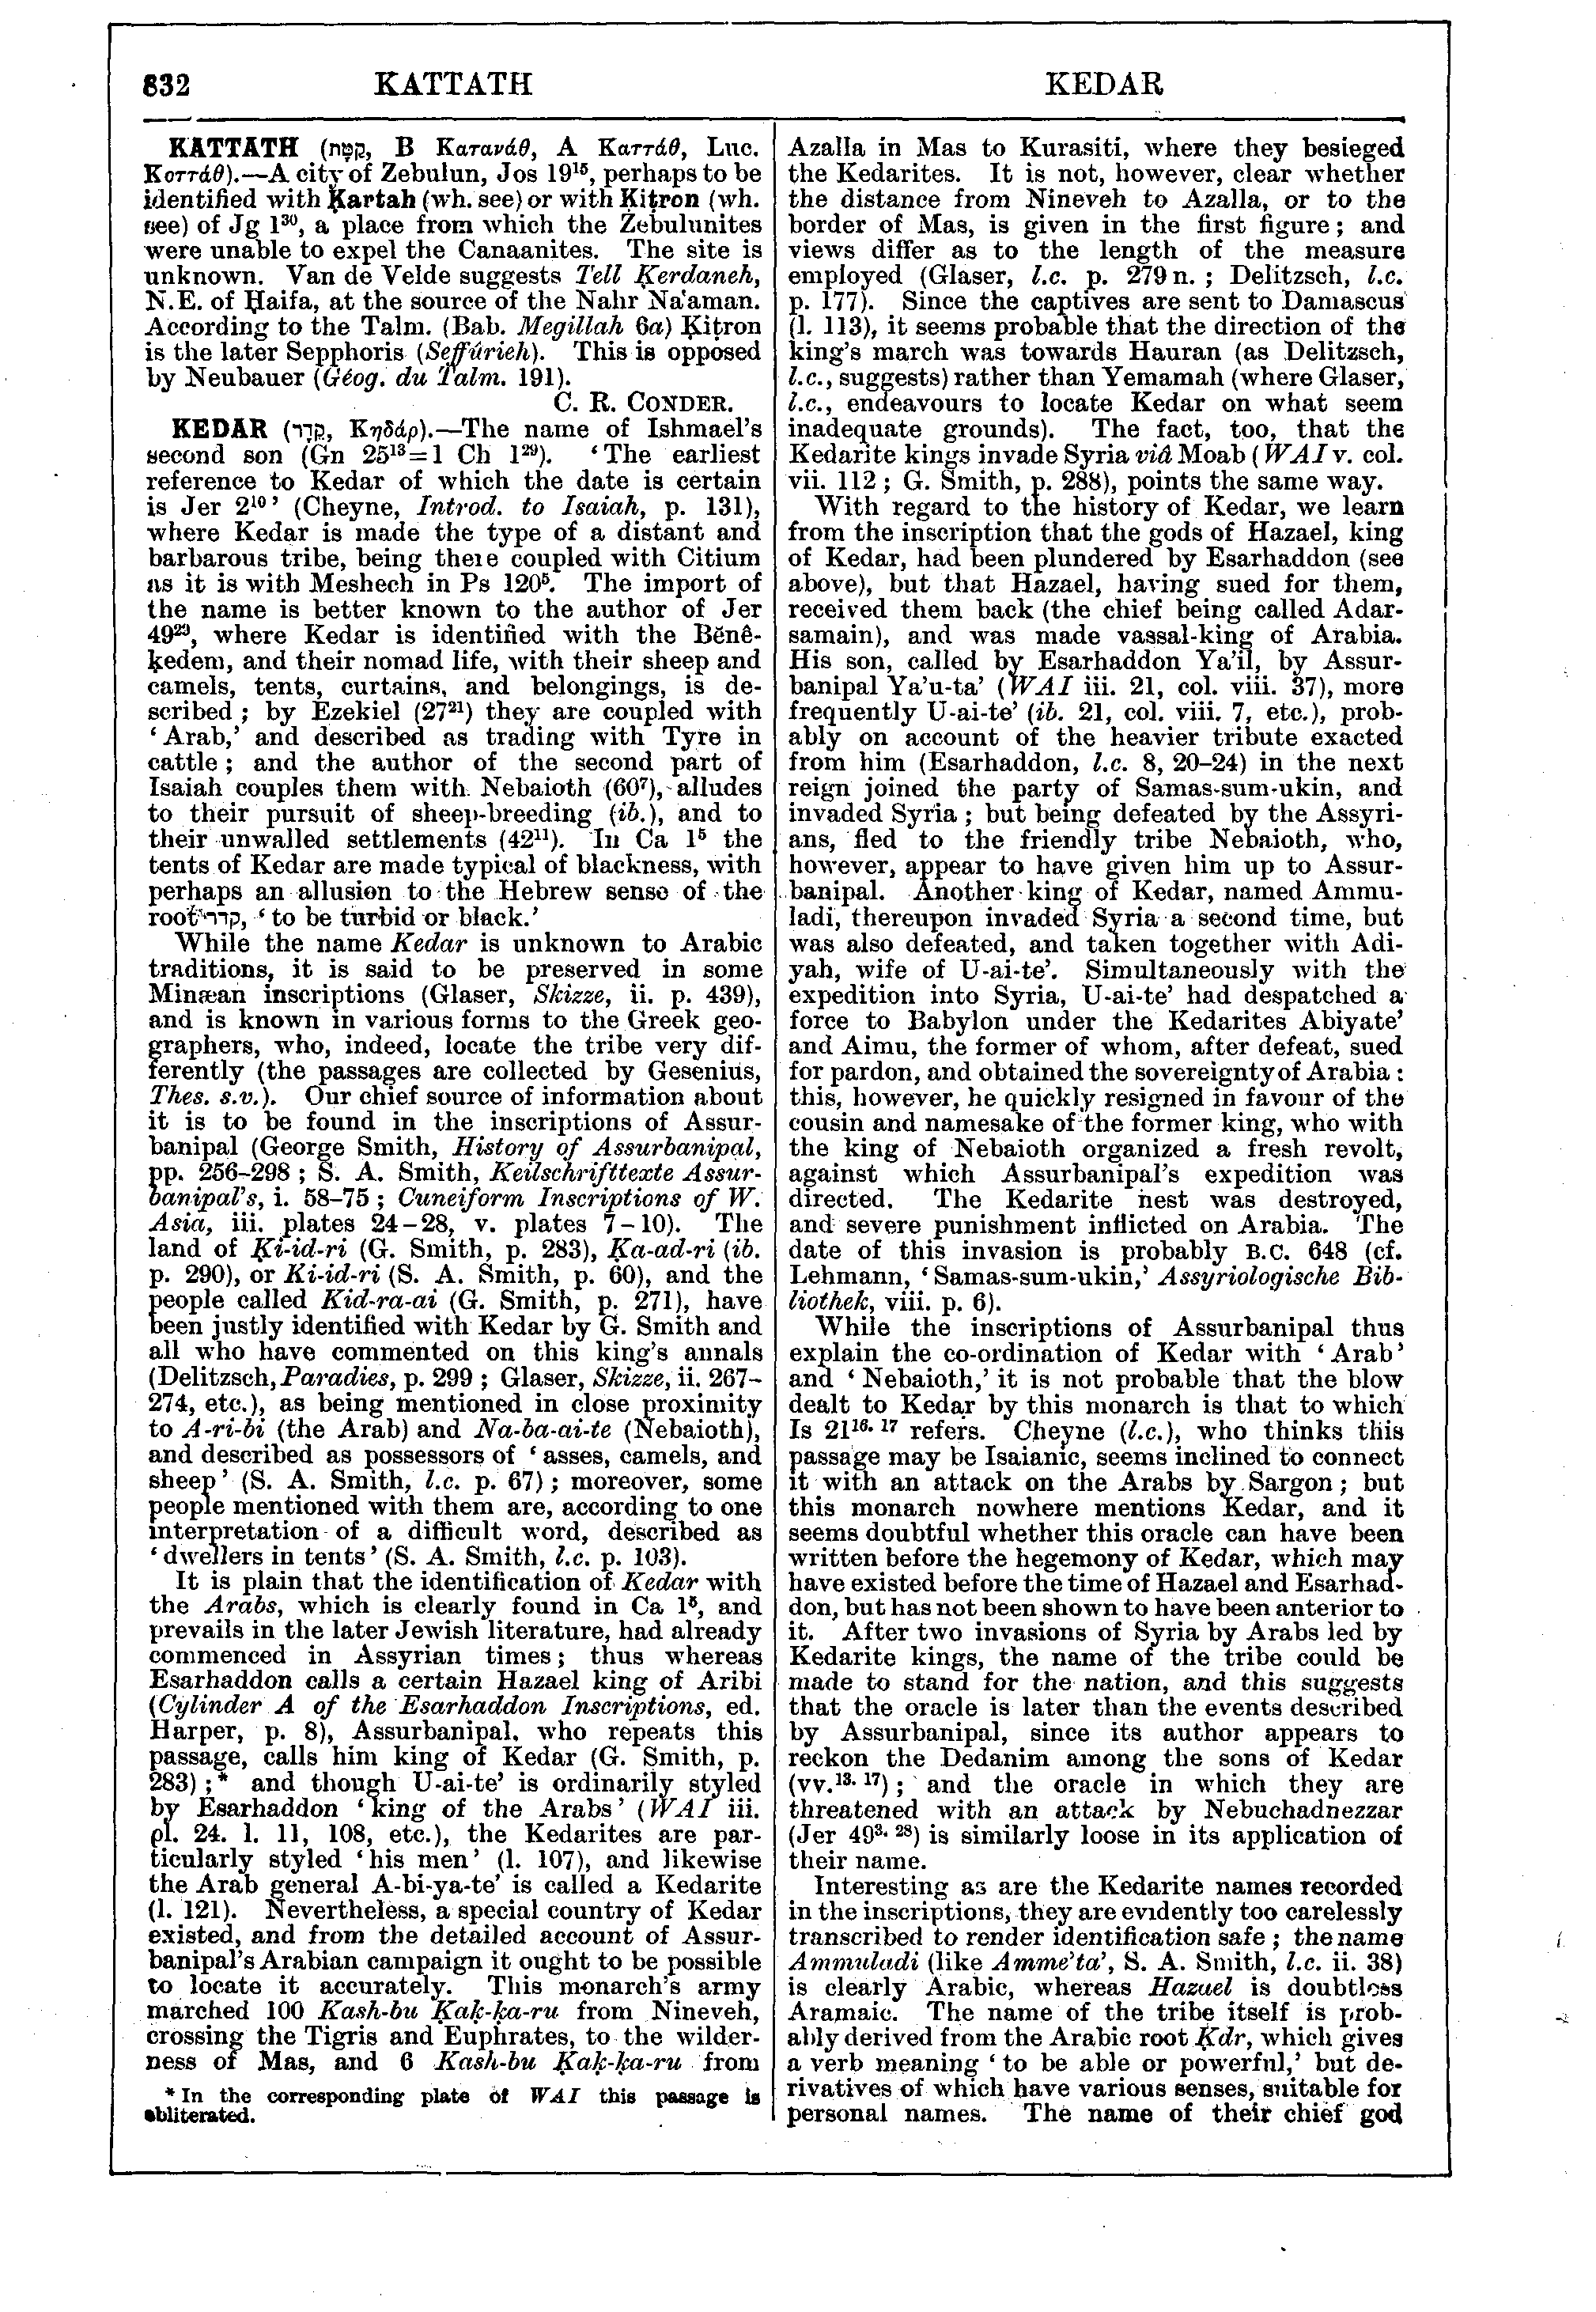 Image of page 832